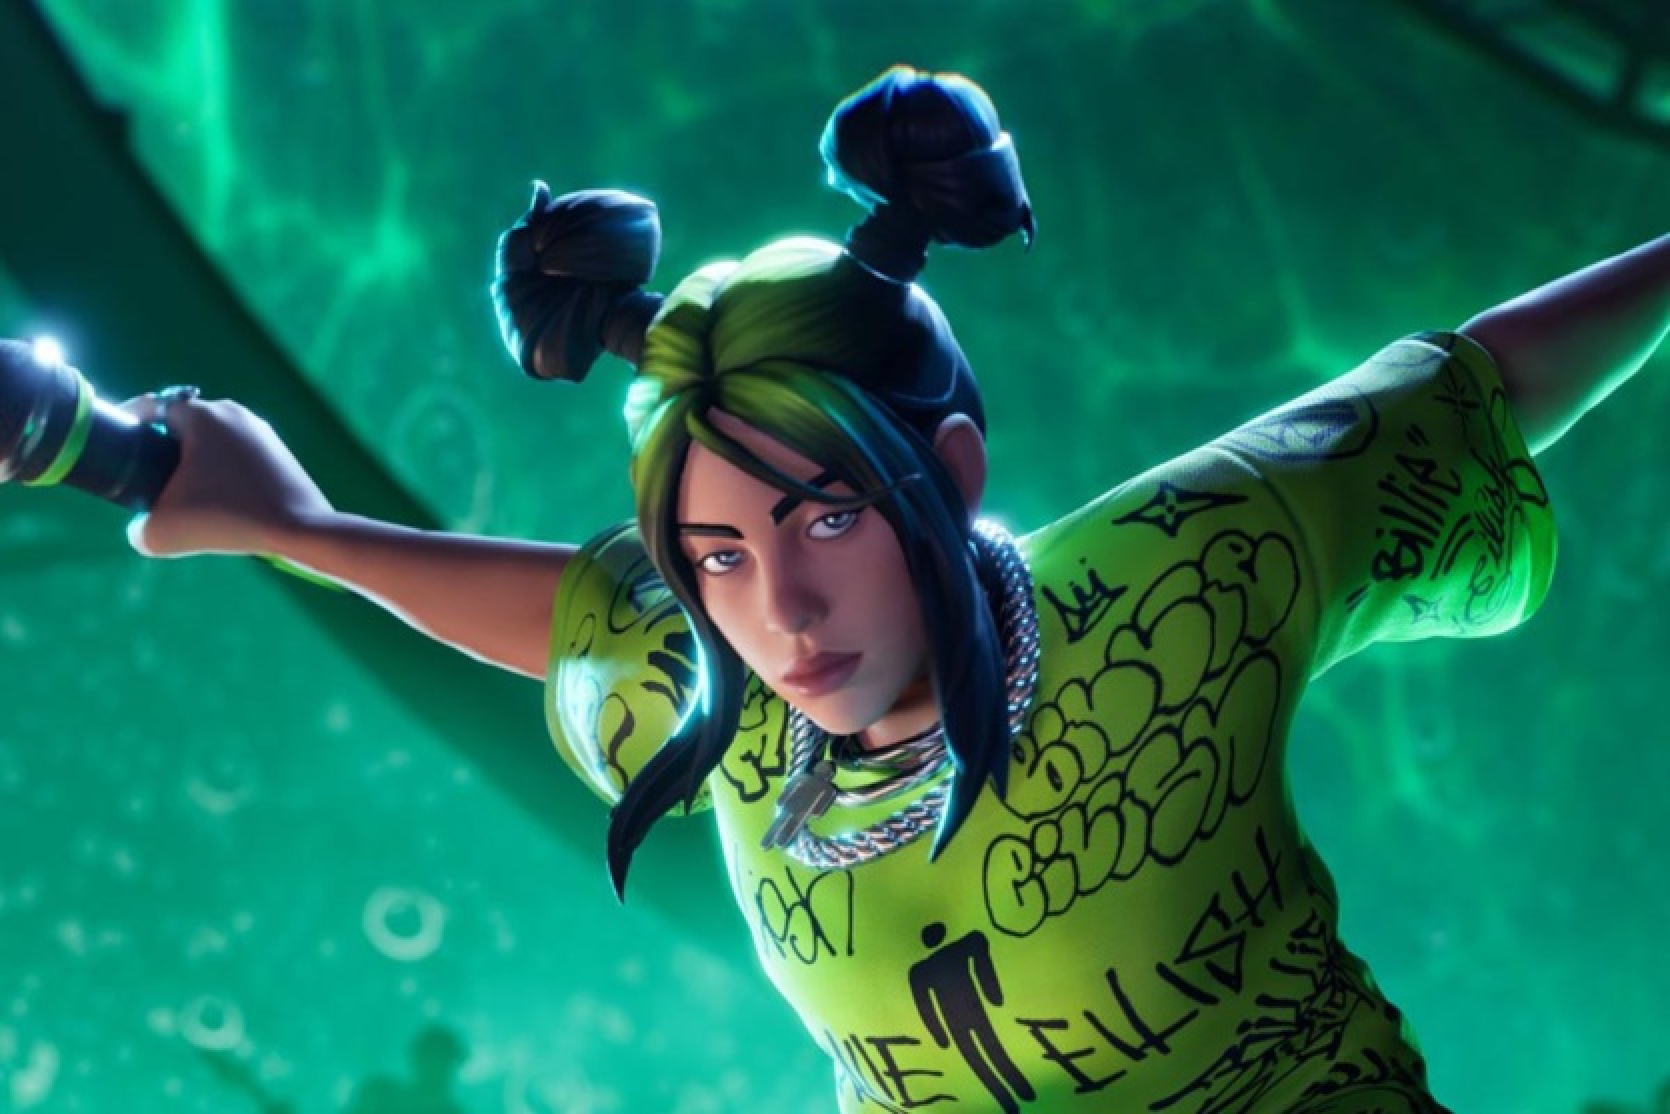 Billie Eilish will appear in the Fortnite Festival rhythm game - her in-game character will take the main stage on April 23rd